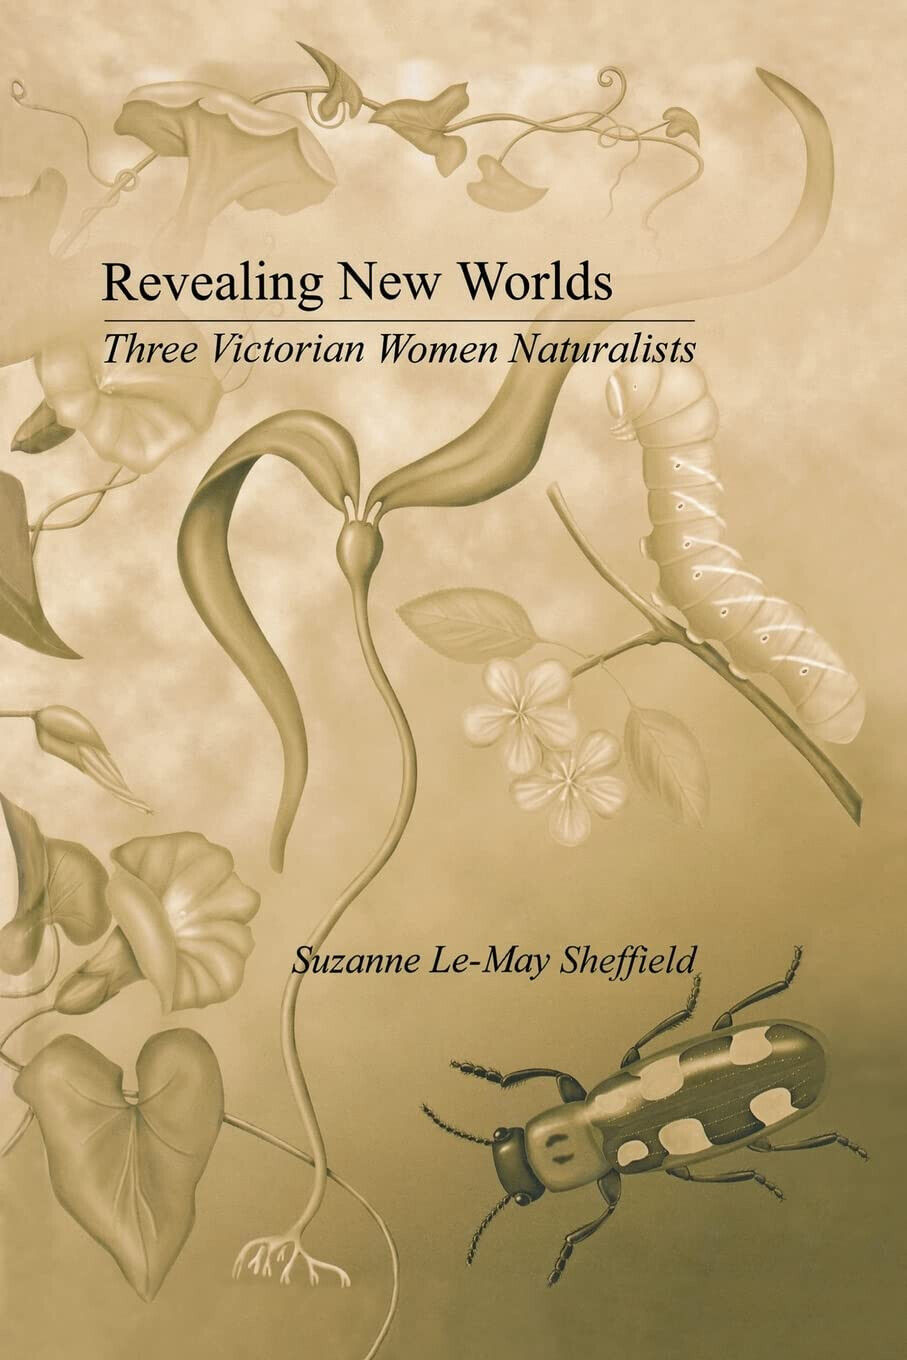 Revealing New Worlds - Suzanne Le-May Sheffield - 2013 libro usato